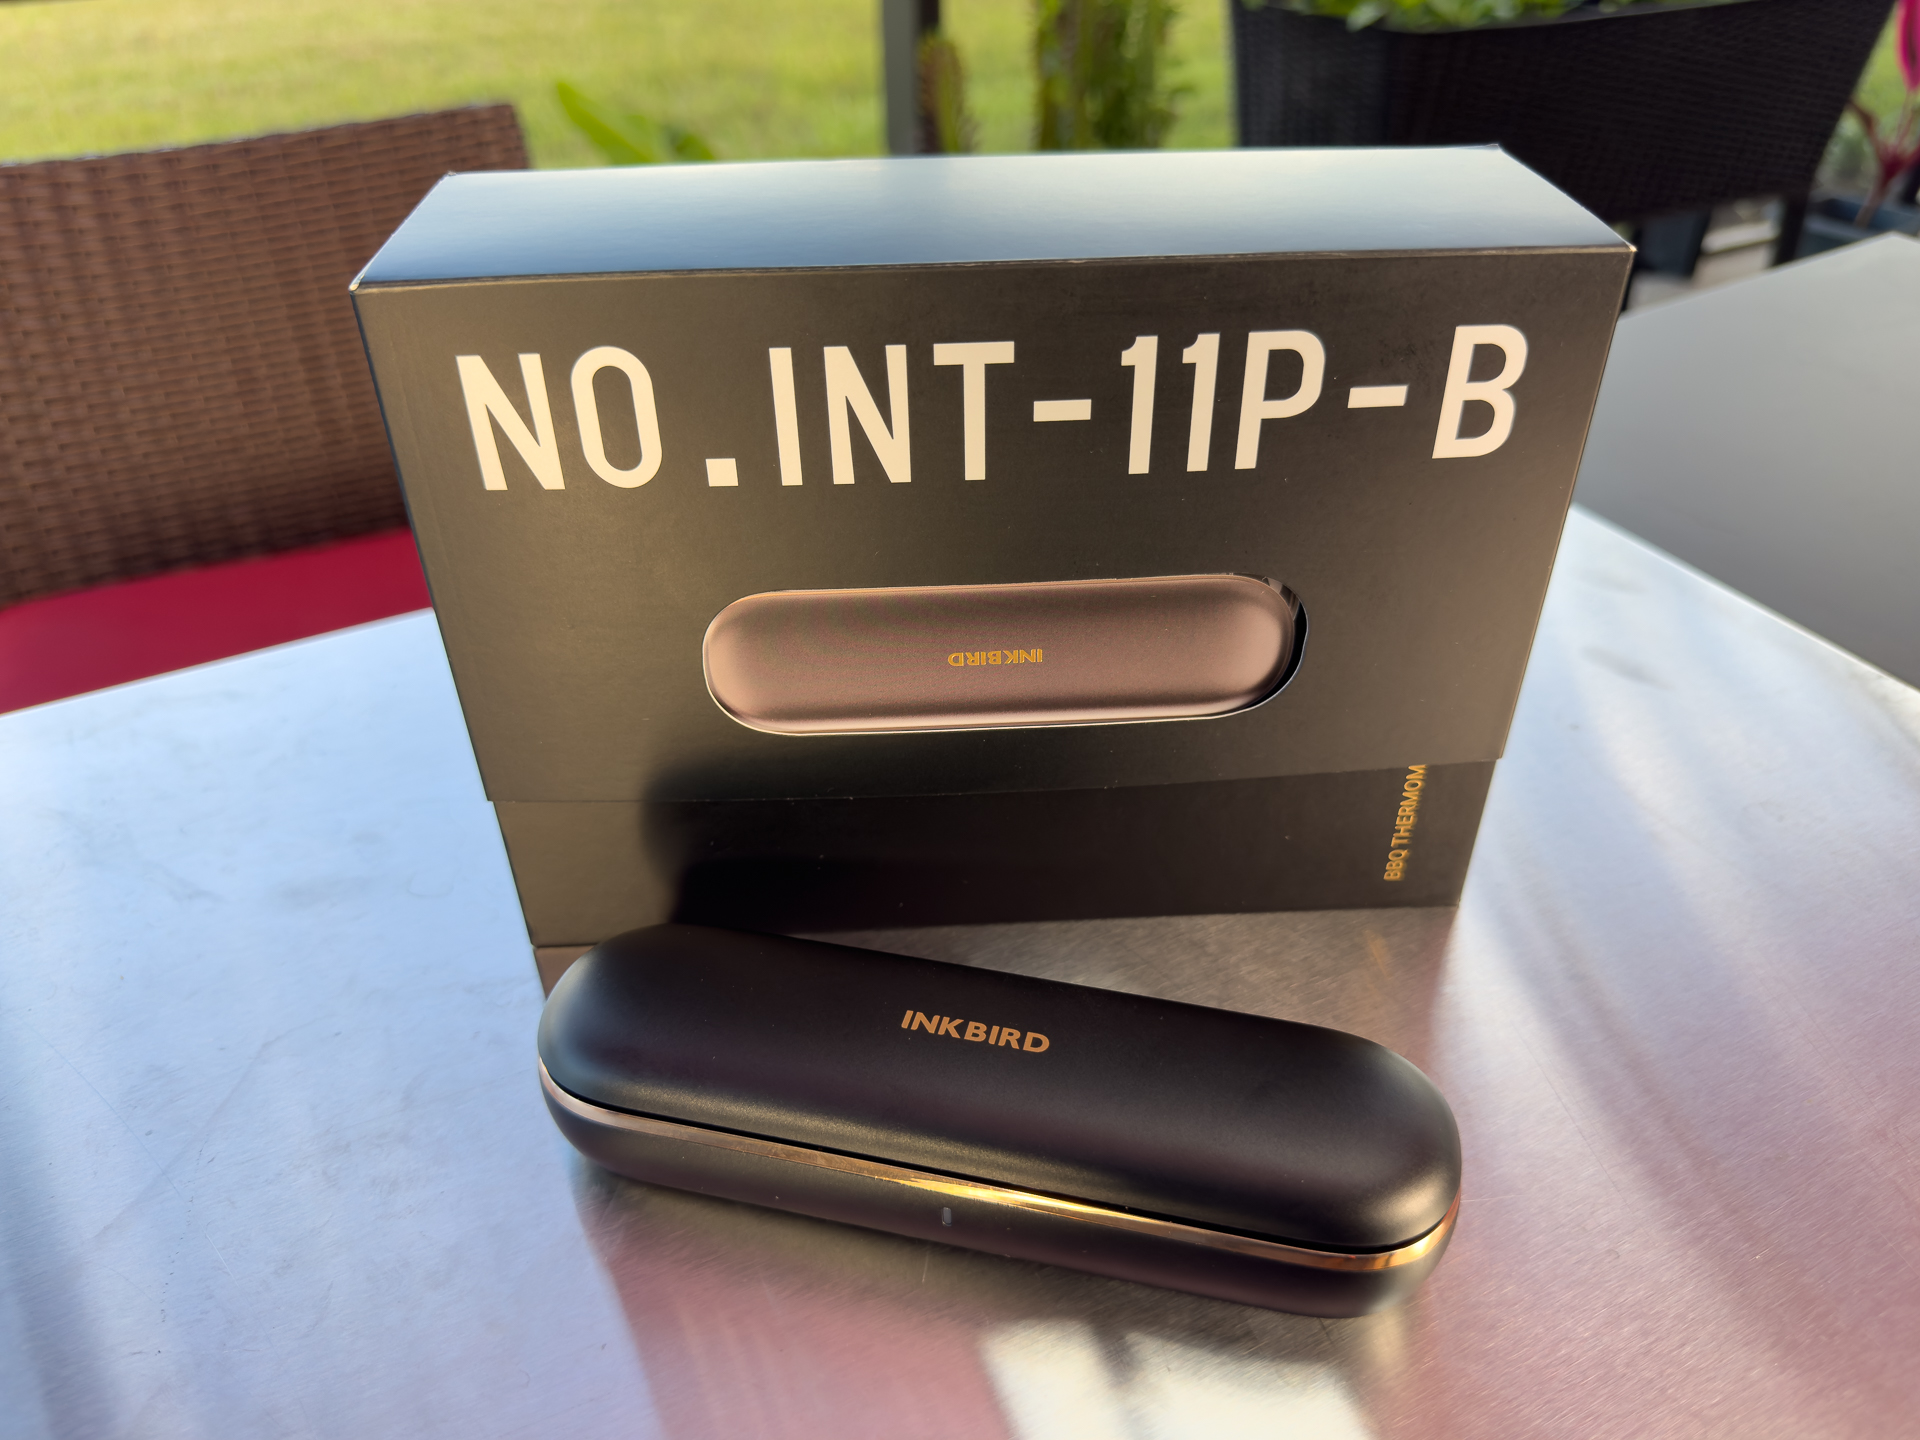 The INKBIRD INT-11P-B Wireless Thermometer and Packaging.